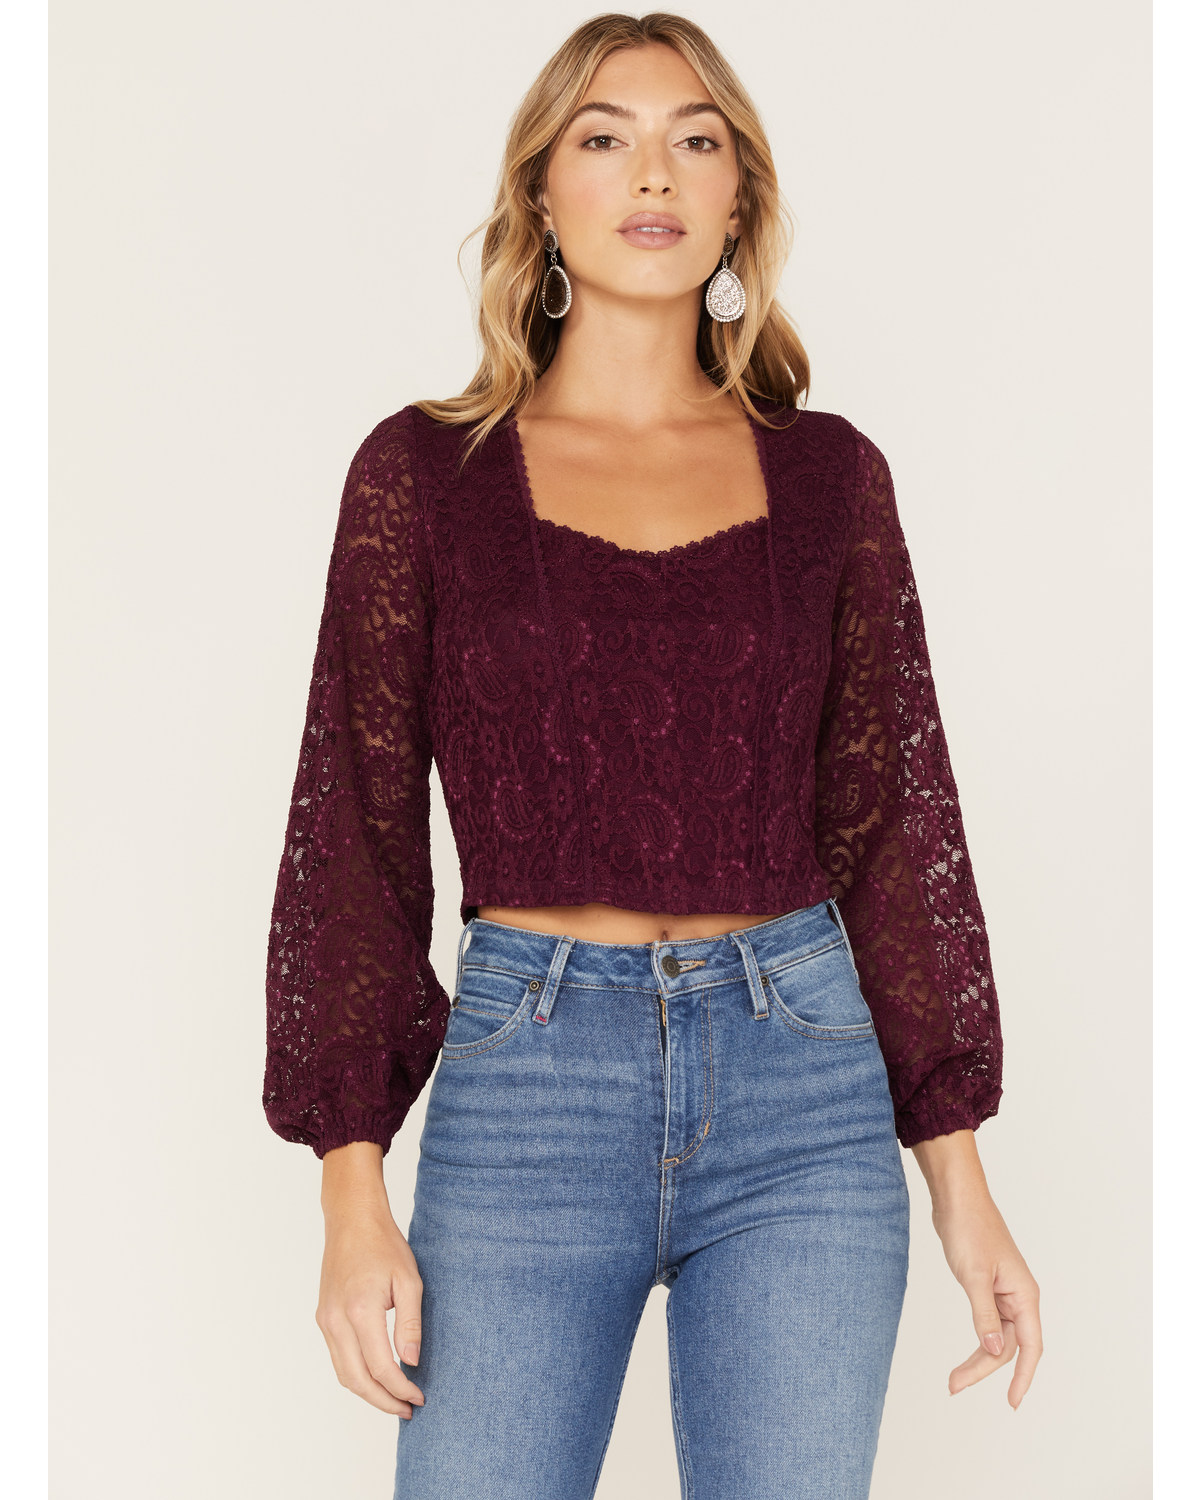 Idyllwind Women's Date Night Floral Lace Crop Top